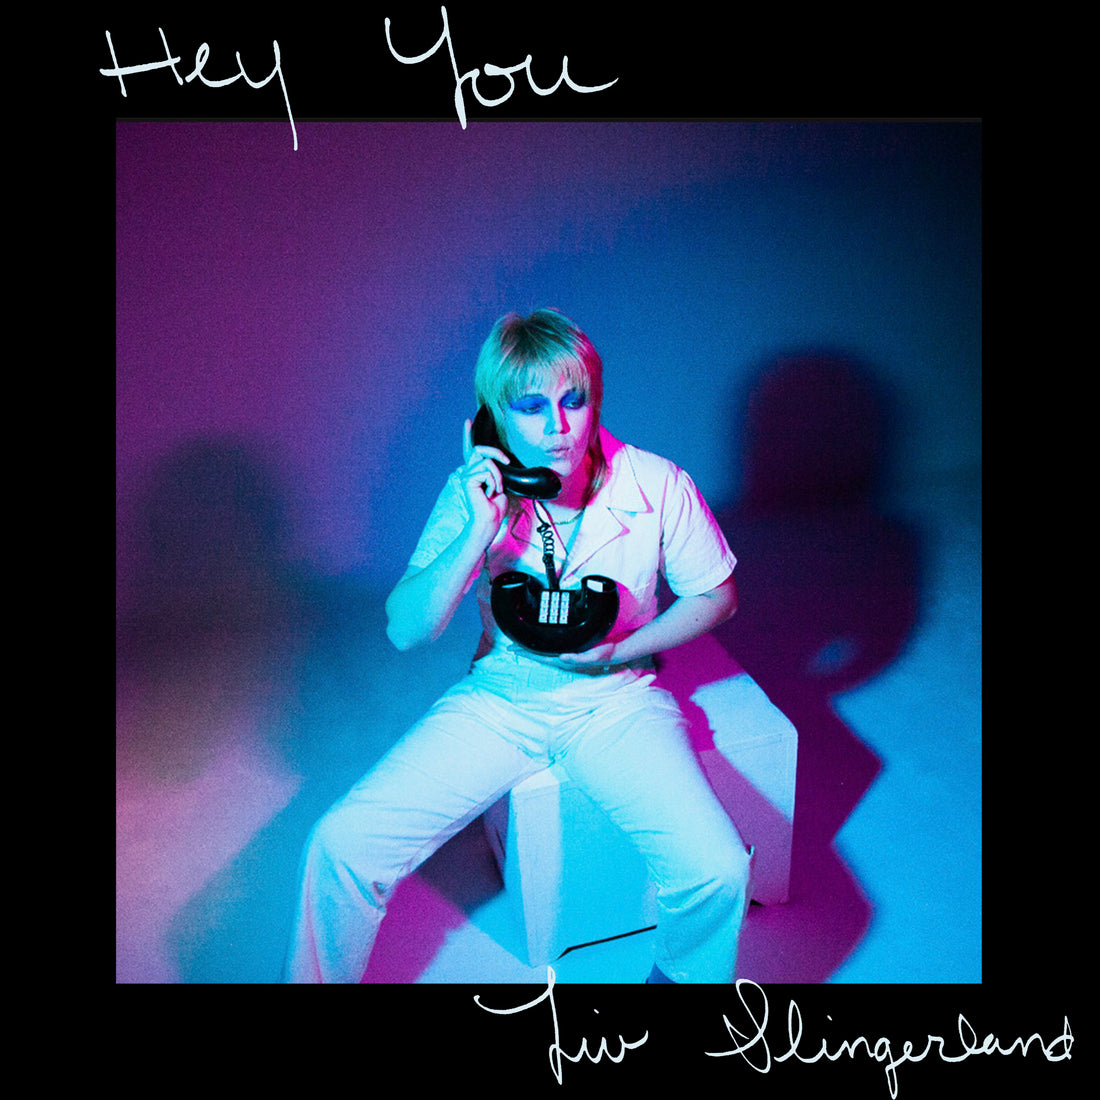 Announcing Liv Slingerland's debut album Hey You coming August 5